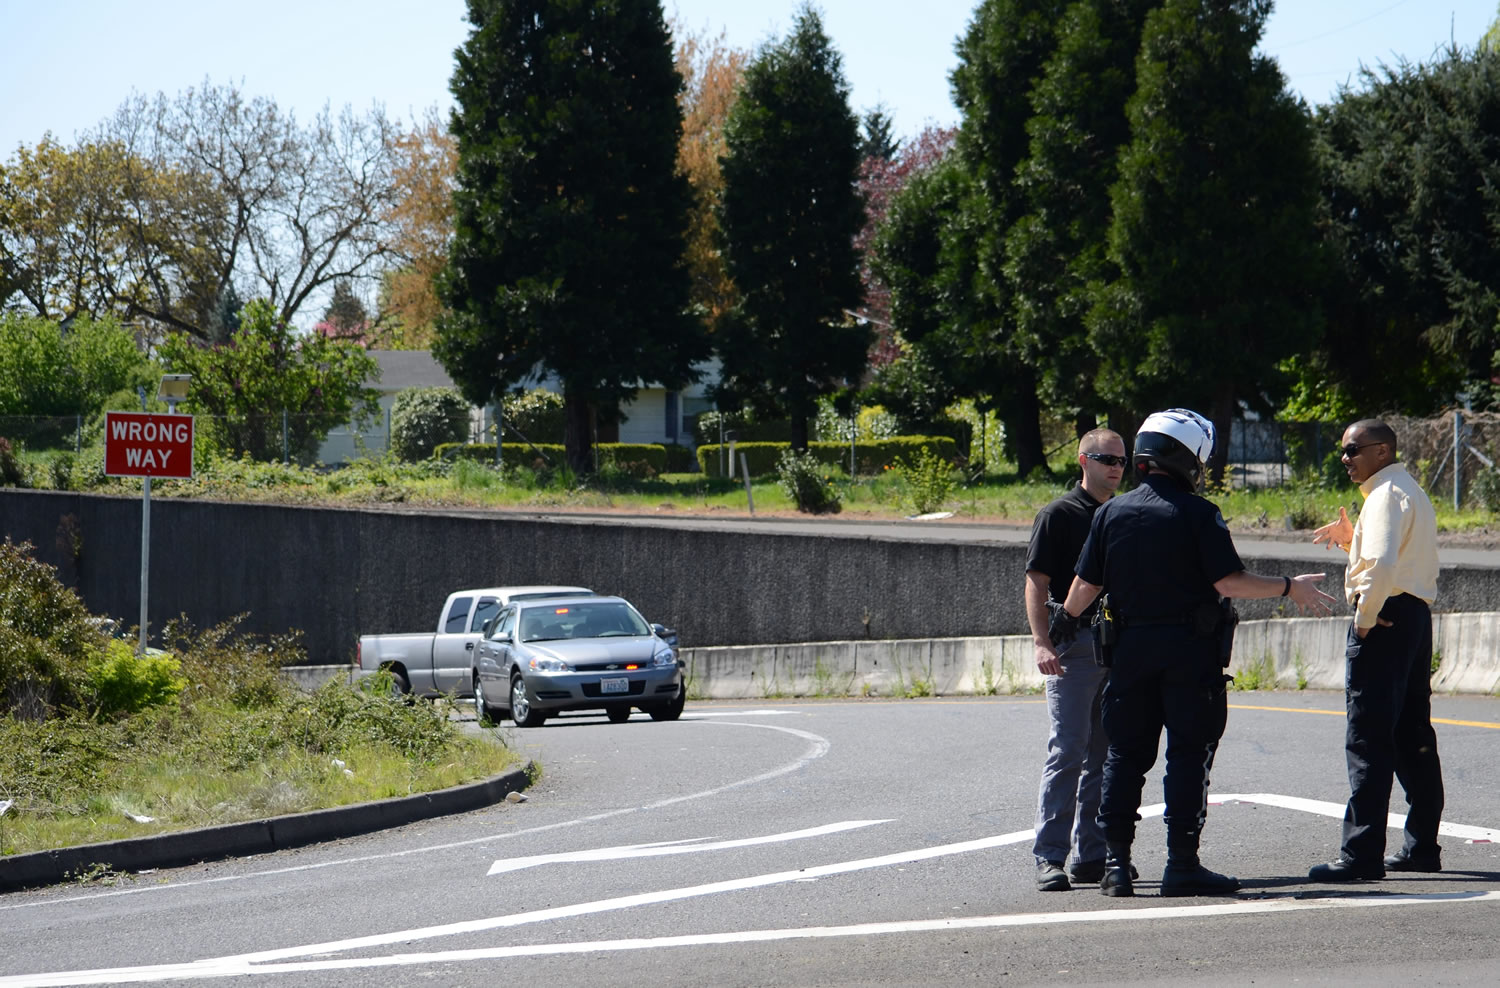 Vancouver police on Wednesday recovered skeletal remains that were found late Tuesday near the ramp from Interstate 5 south to East 39th Street.